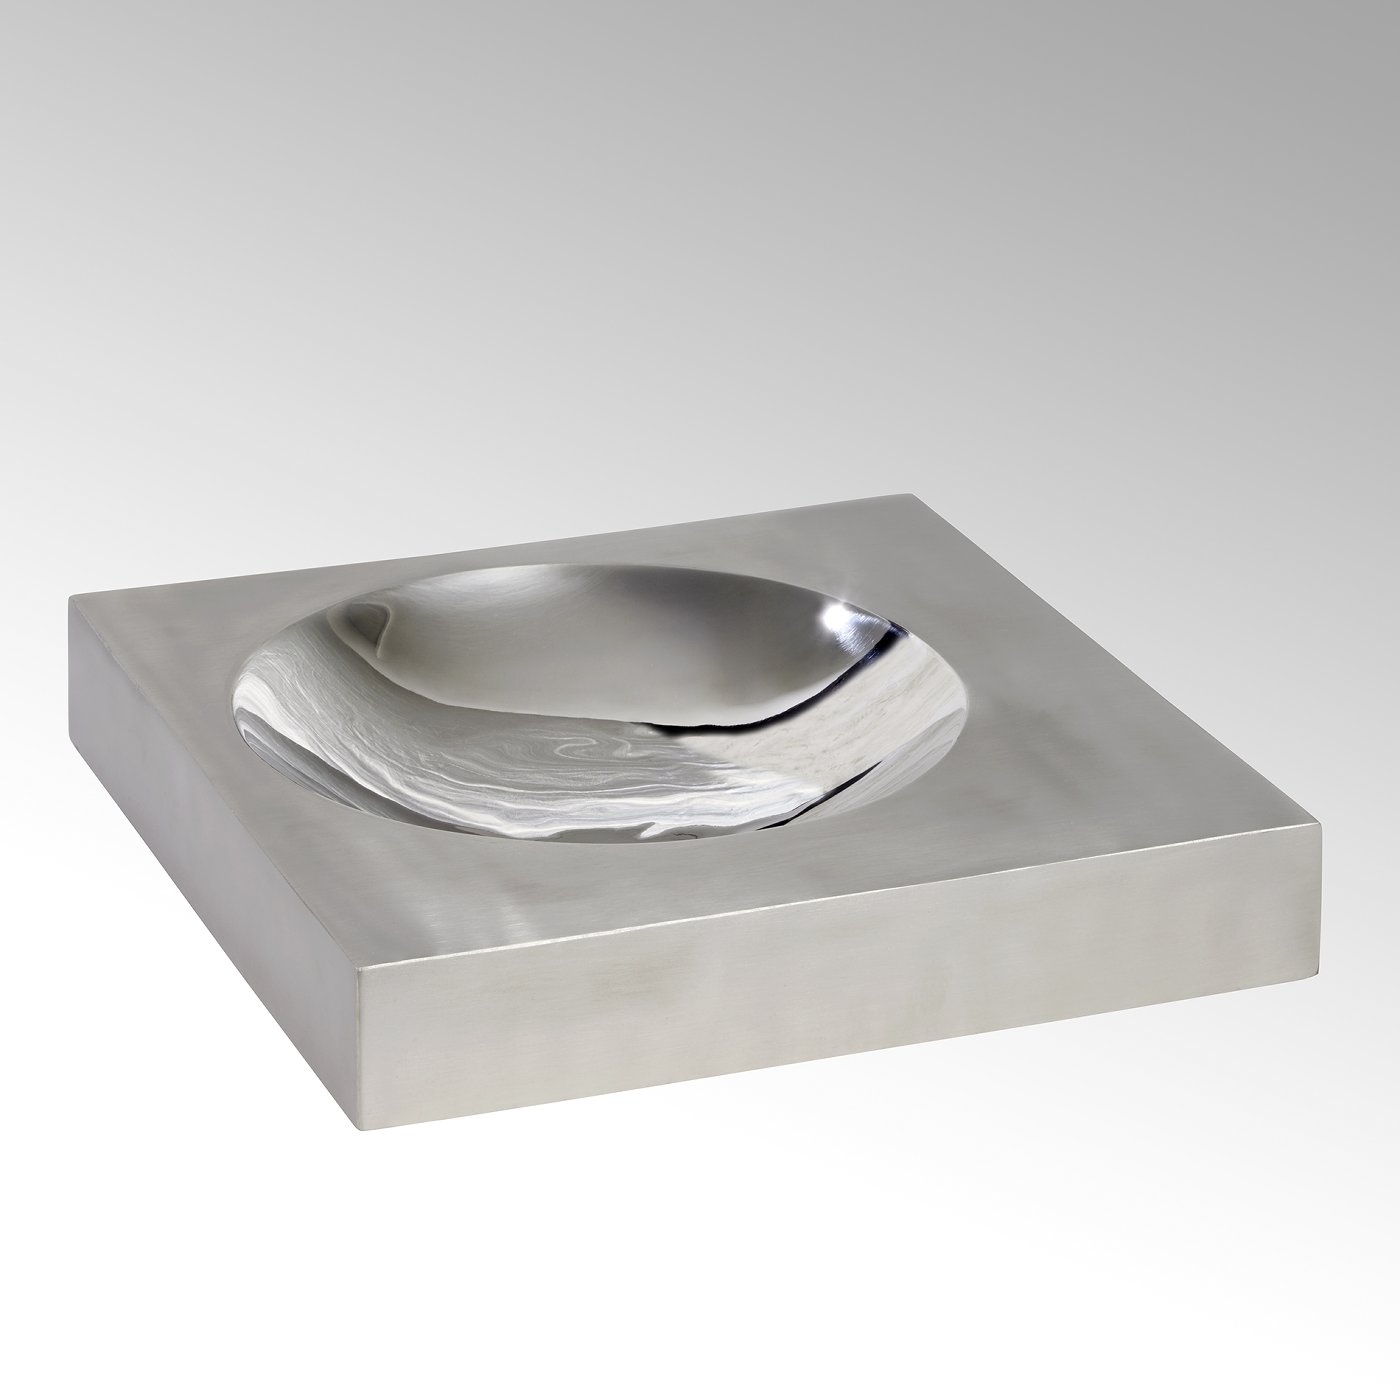 Guadrat bowl, square, stainless steel